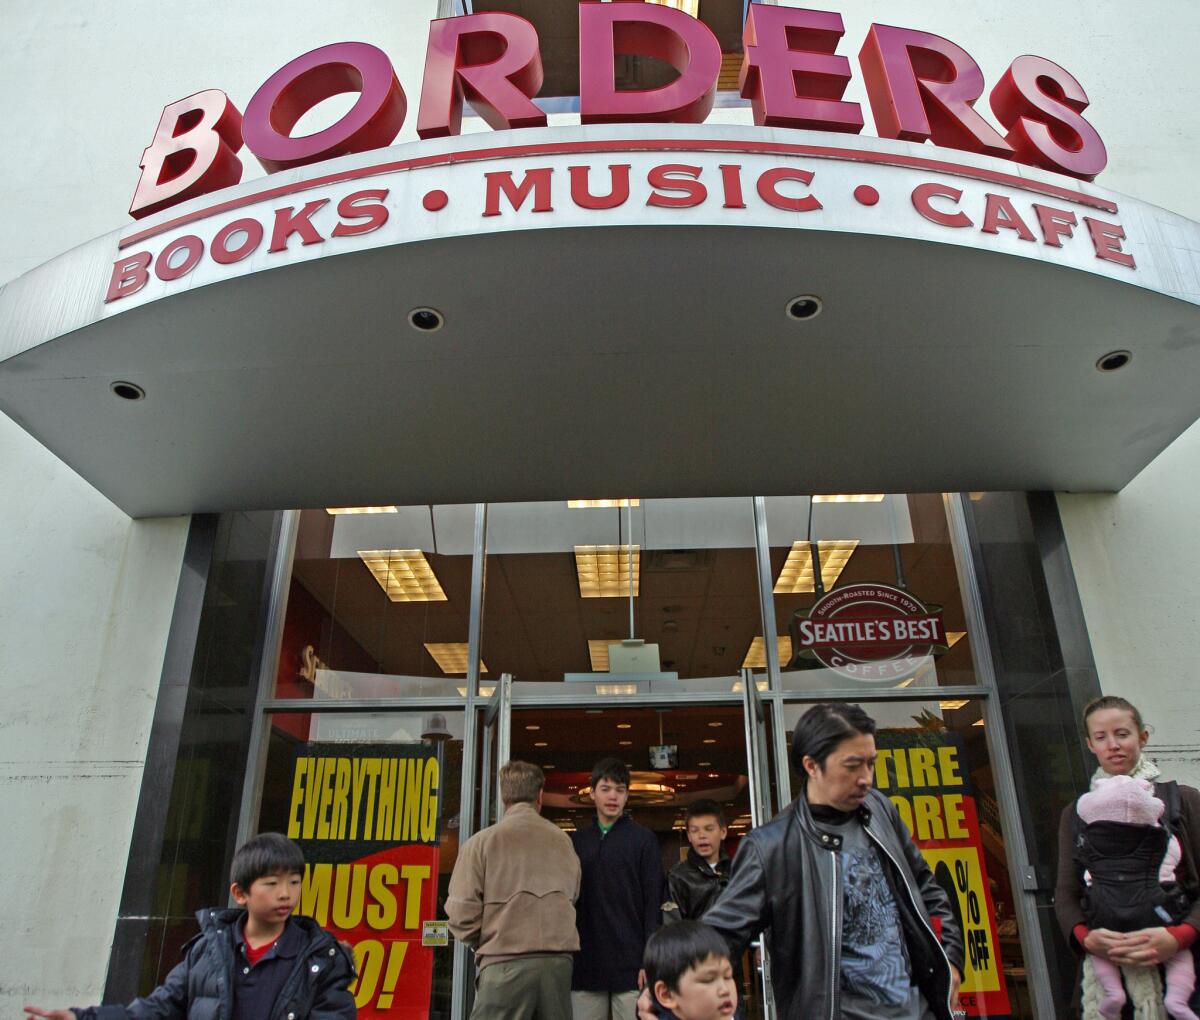 A Borders store in Pasadena during its closing sale in February 2011.